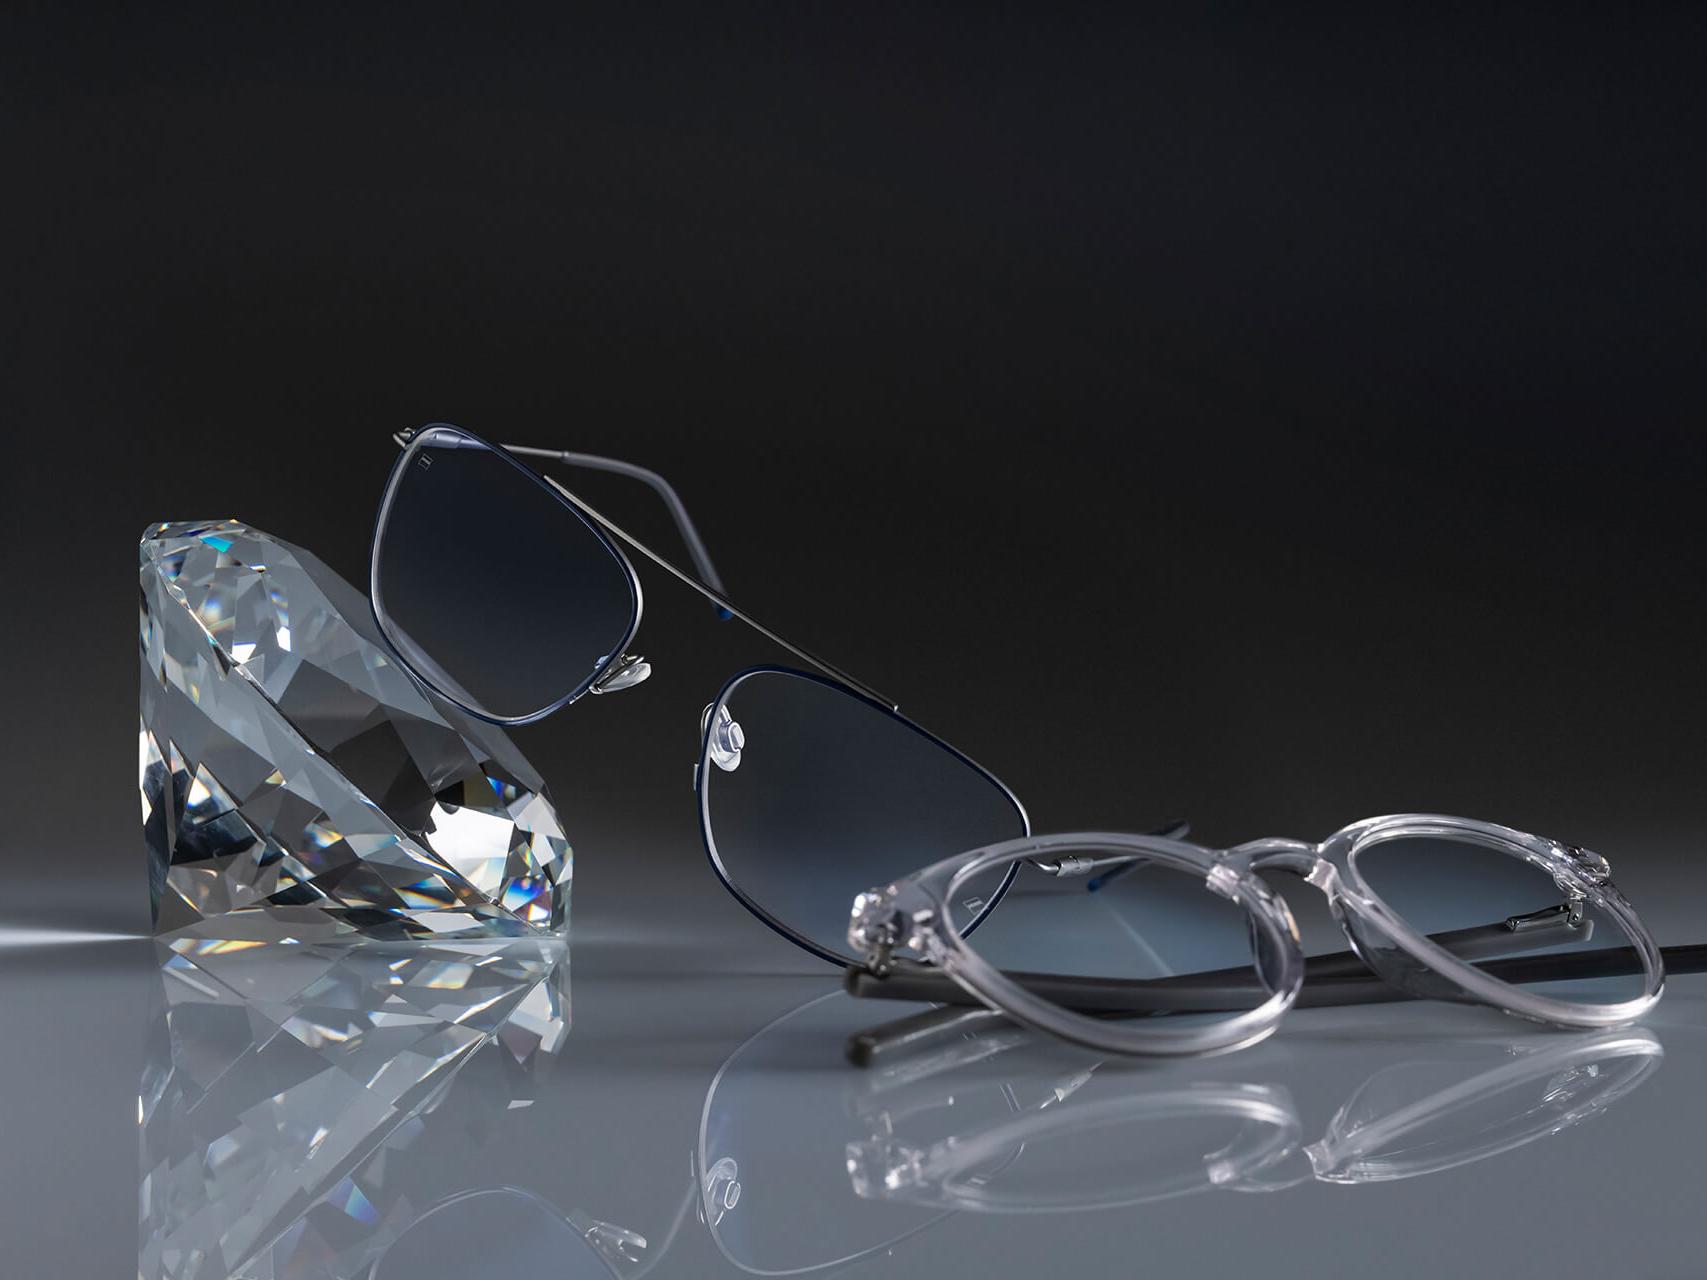 Two pairs of glasses with ZEISS lenses that have the hardest ZEISS coating ever – DuraVision® Platinum. One pair of glasses leans against a crystal, the other lies flat on the ground. Both feature clear lenses with no bluish reflection.